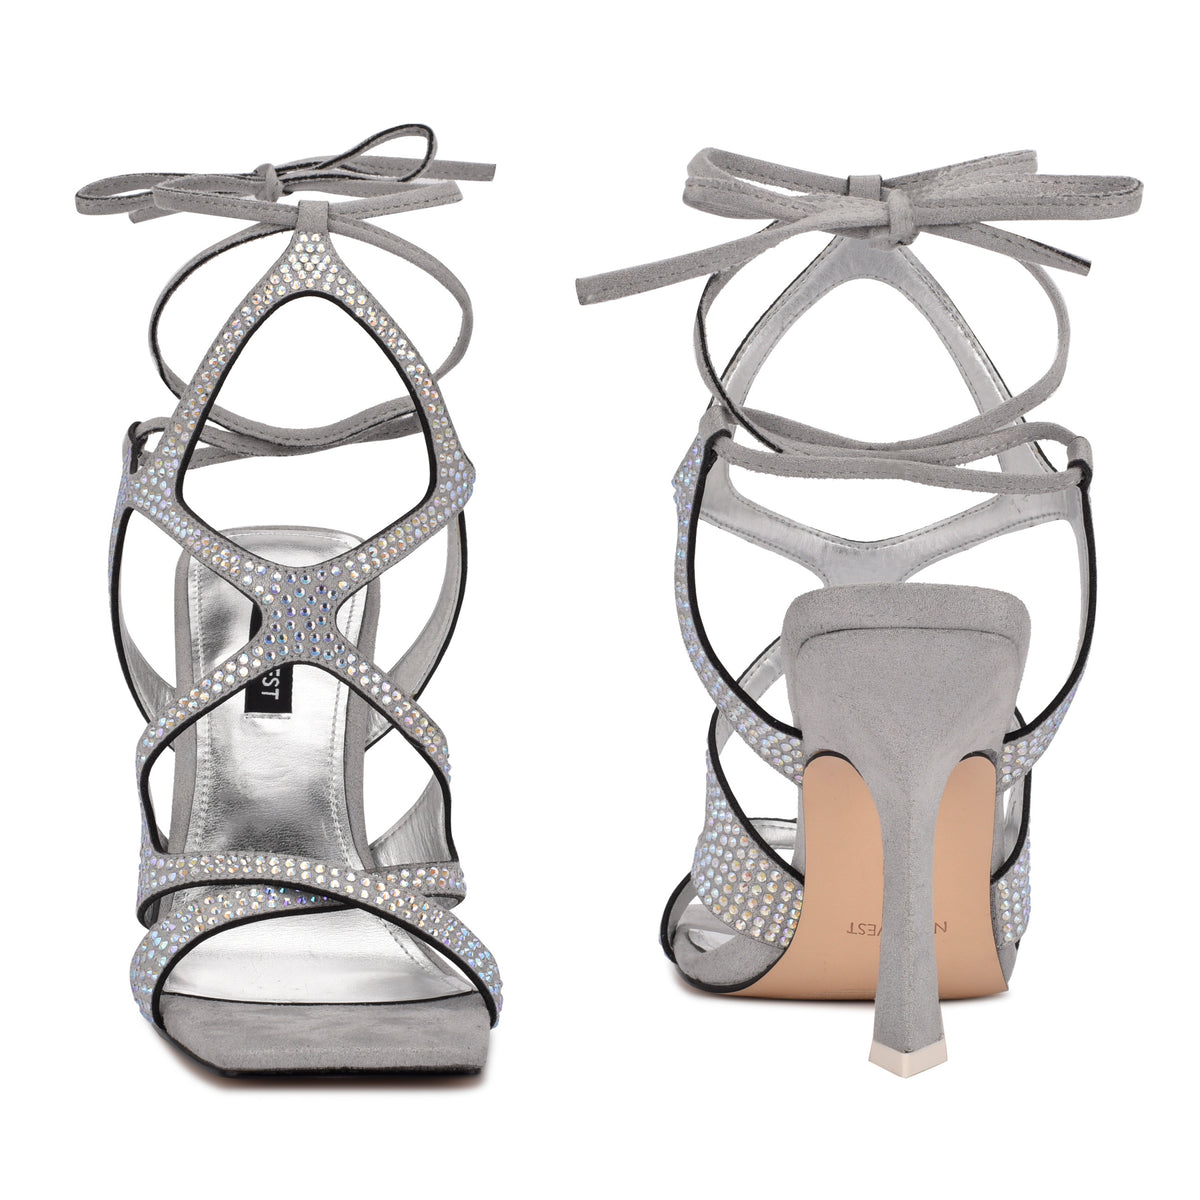 Alanah Ankle Wrap Heeled Sandals